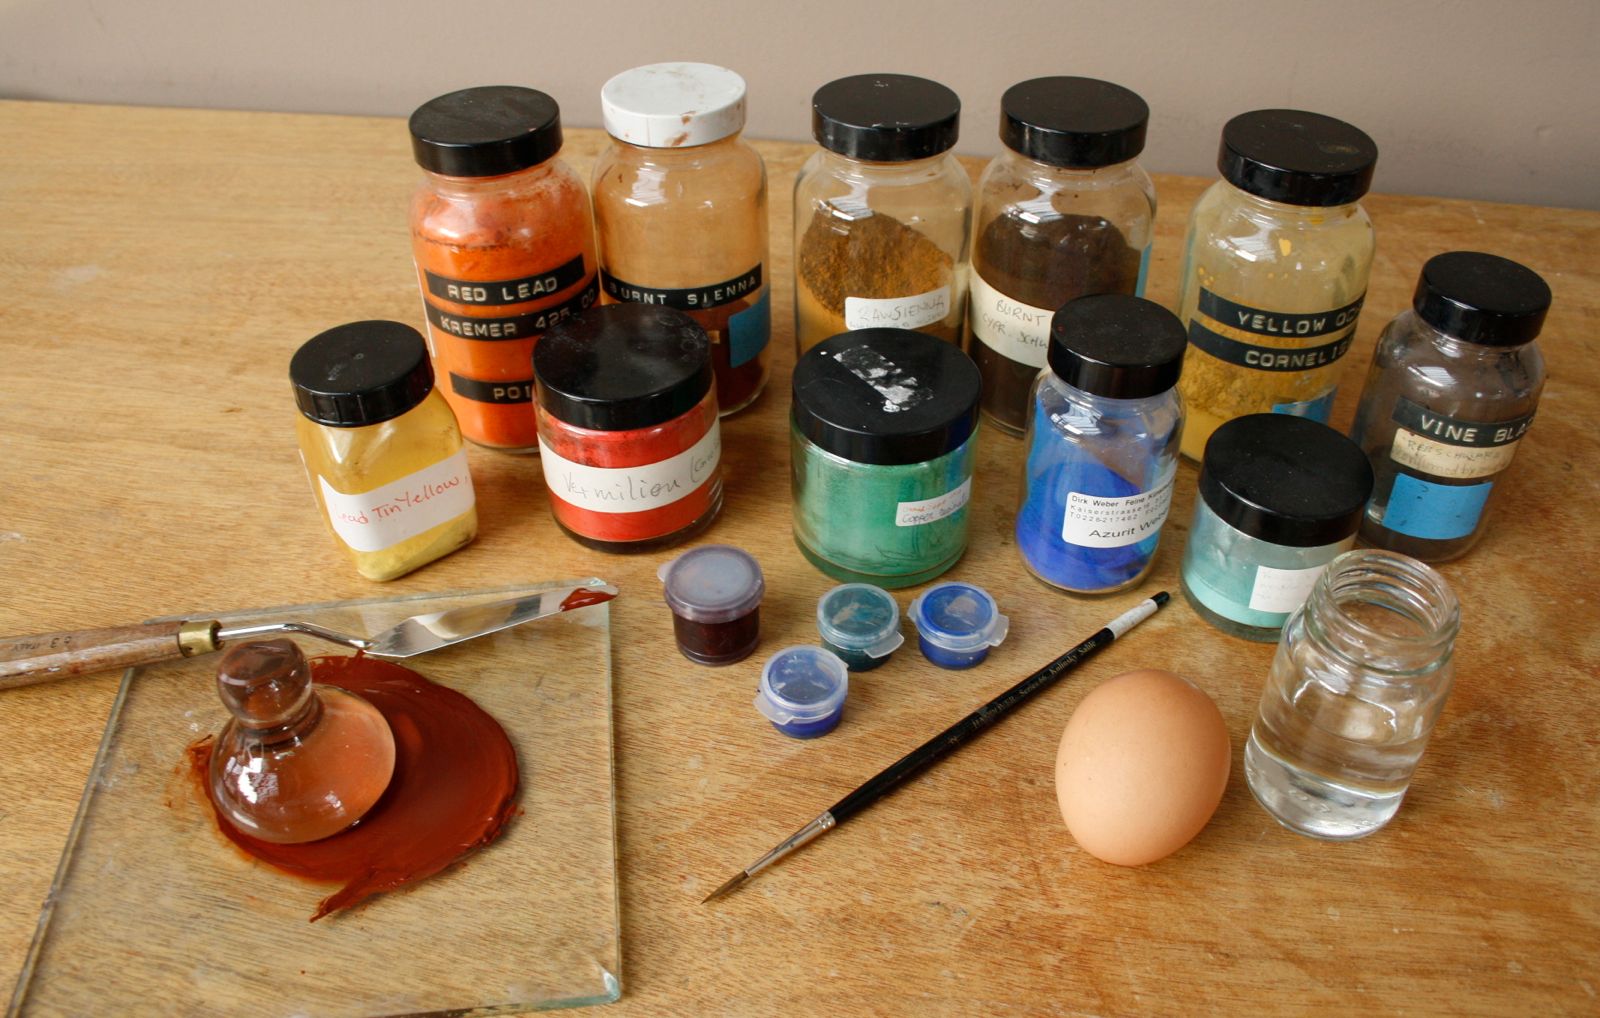 Materials used to make egg tempera paint